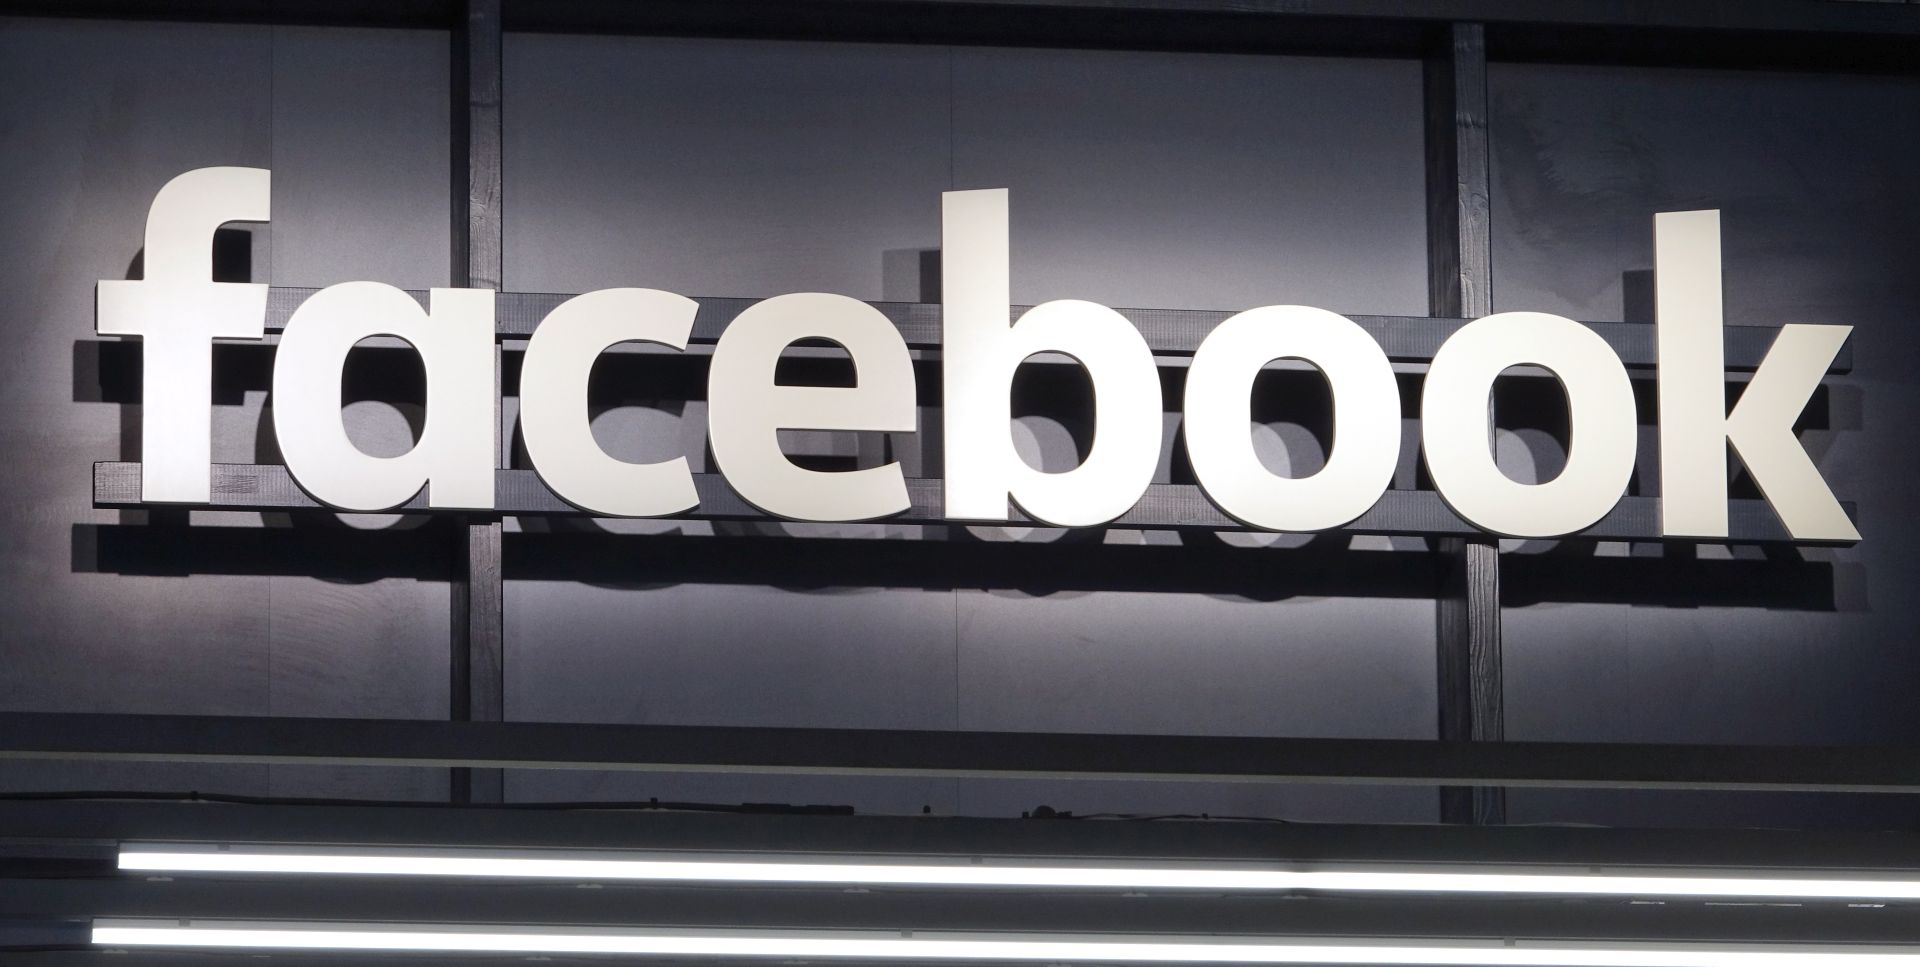 epa07054951 (FILE) - The signage of Facebook illuminated at company stand during the 2nd press preview day of the International Motor Show IAA in Frankfurt Main, Germany, 12 September 2017 (reissued 28 September 2018). According to reports on 28 September 2018 Facebook has announced that a previously unreported attack on its network exposed the personal data of nearly 50 million users. According to the Social network, the breach was discovered earlier this week, adding that the vulnerability has been fixed and law enforcement has been notified.  EPA/MAURITZ ANTIN *** Local Caption *** 54514490